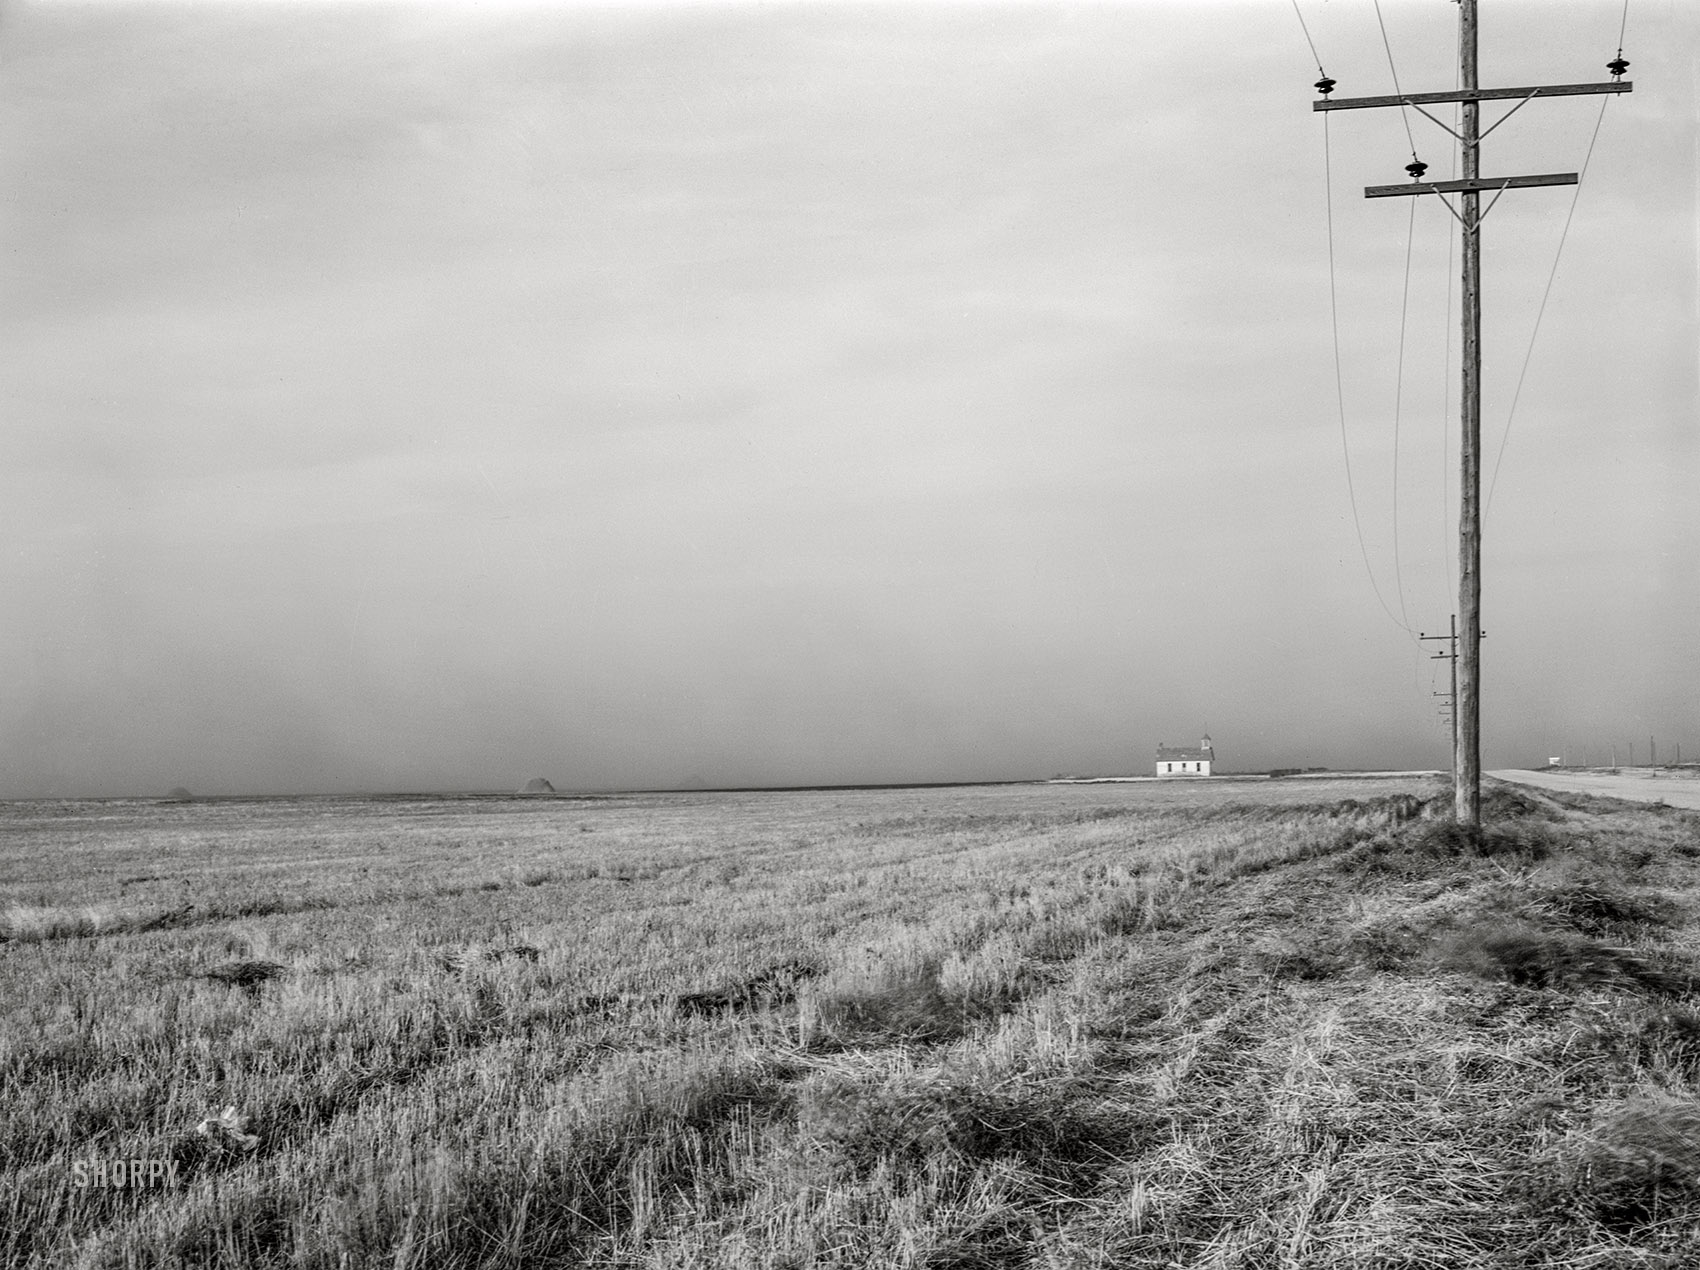 October 1940. "Dust storm. Ramsey County, North Dakota." Medium format acetate negative by John Vachon for the Farm Security Administration. View full size.